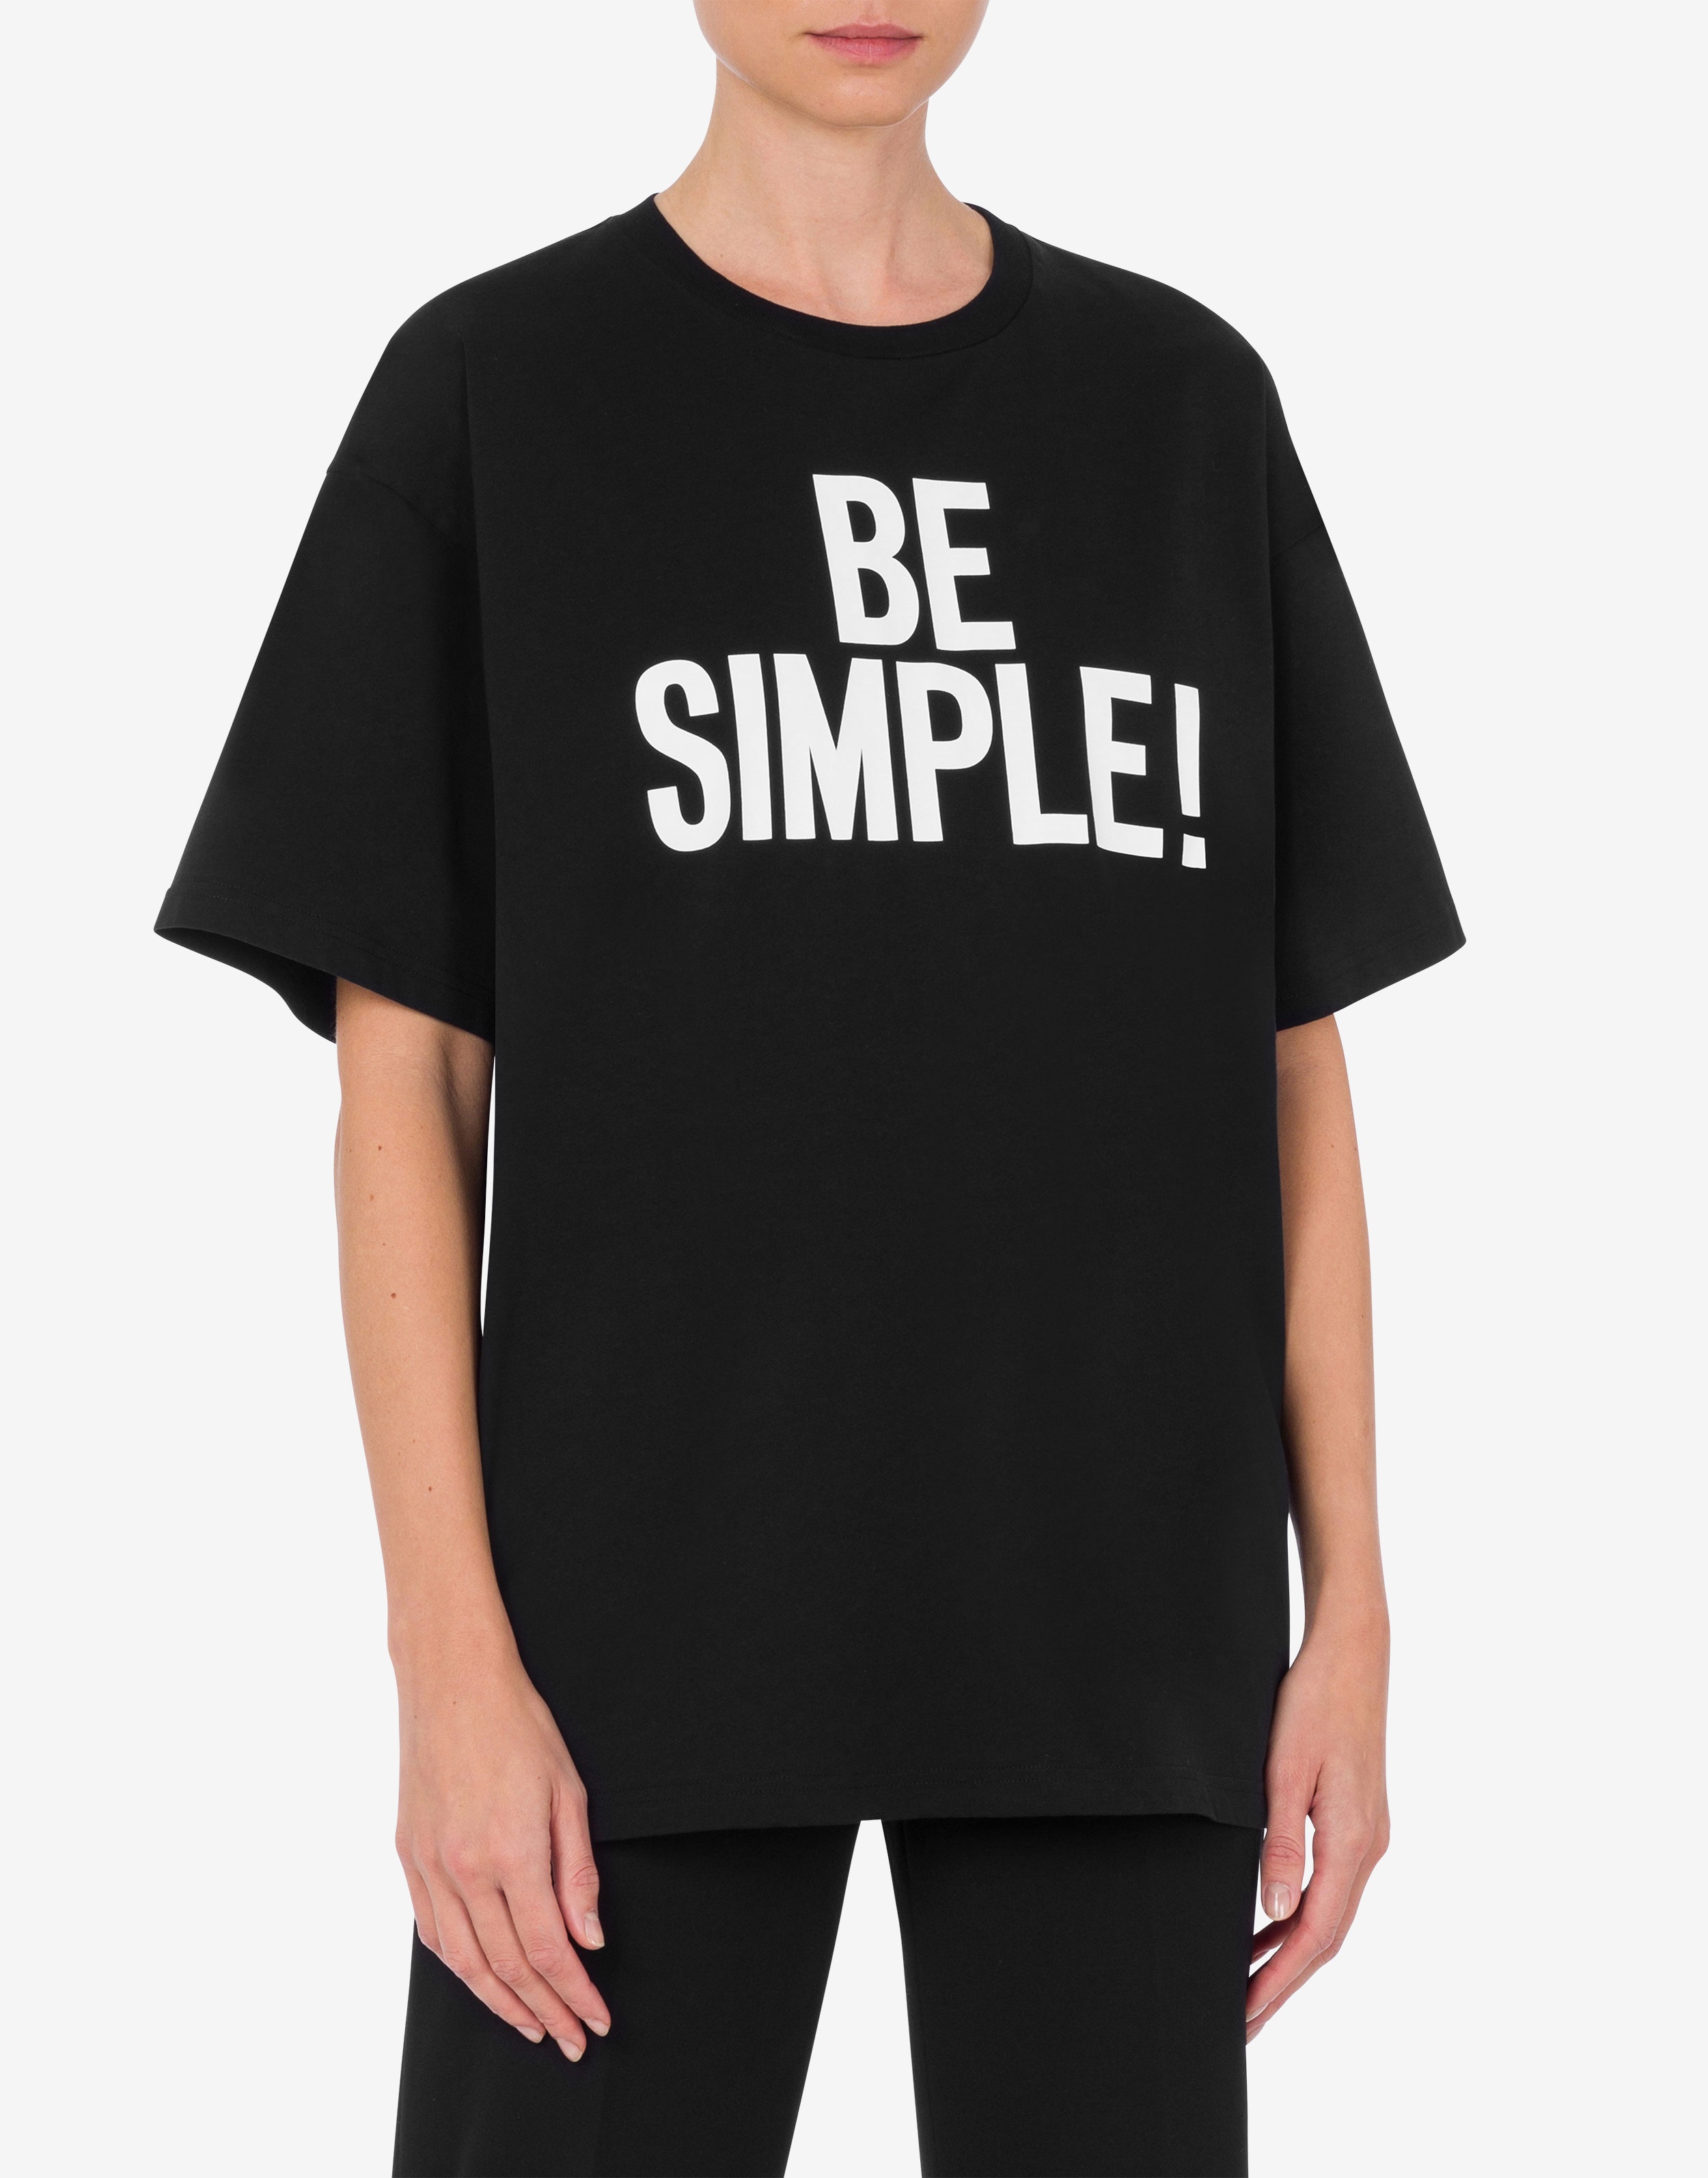 BE SIMPLE! JERSEY T-SHIRT - 2